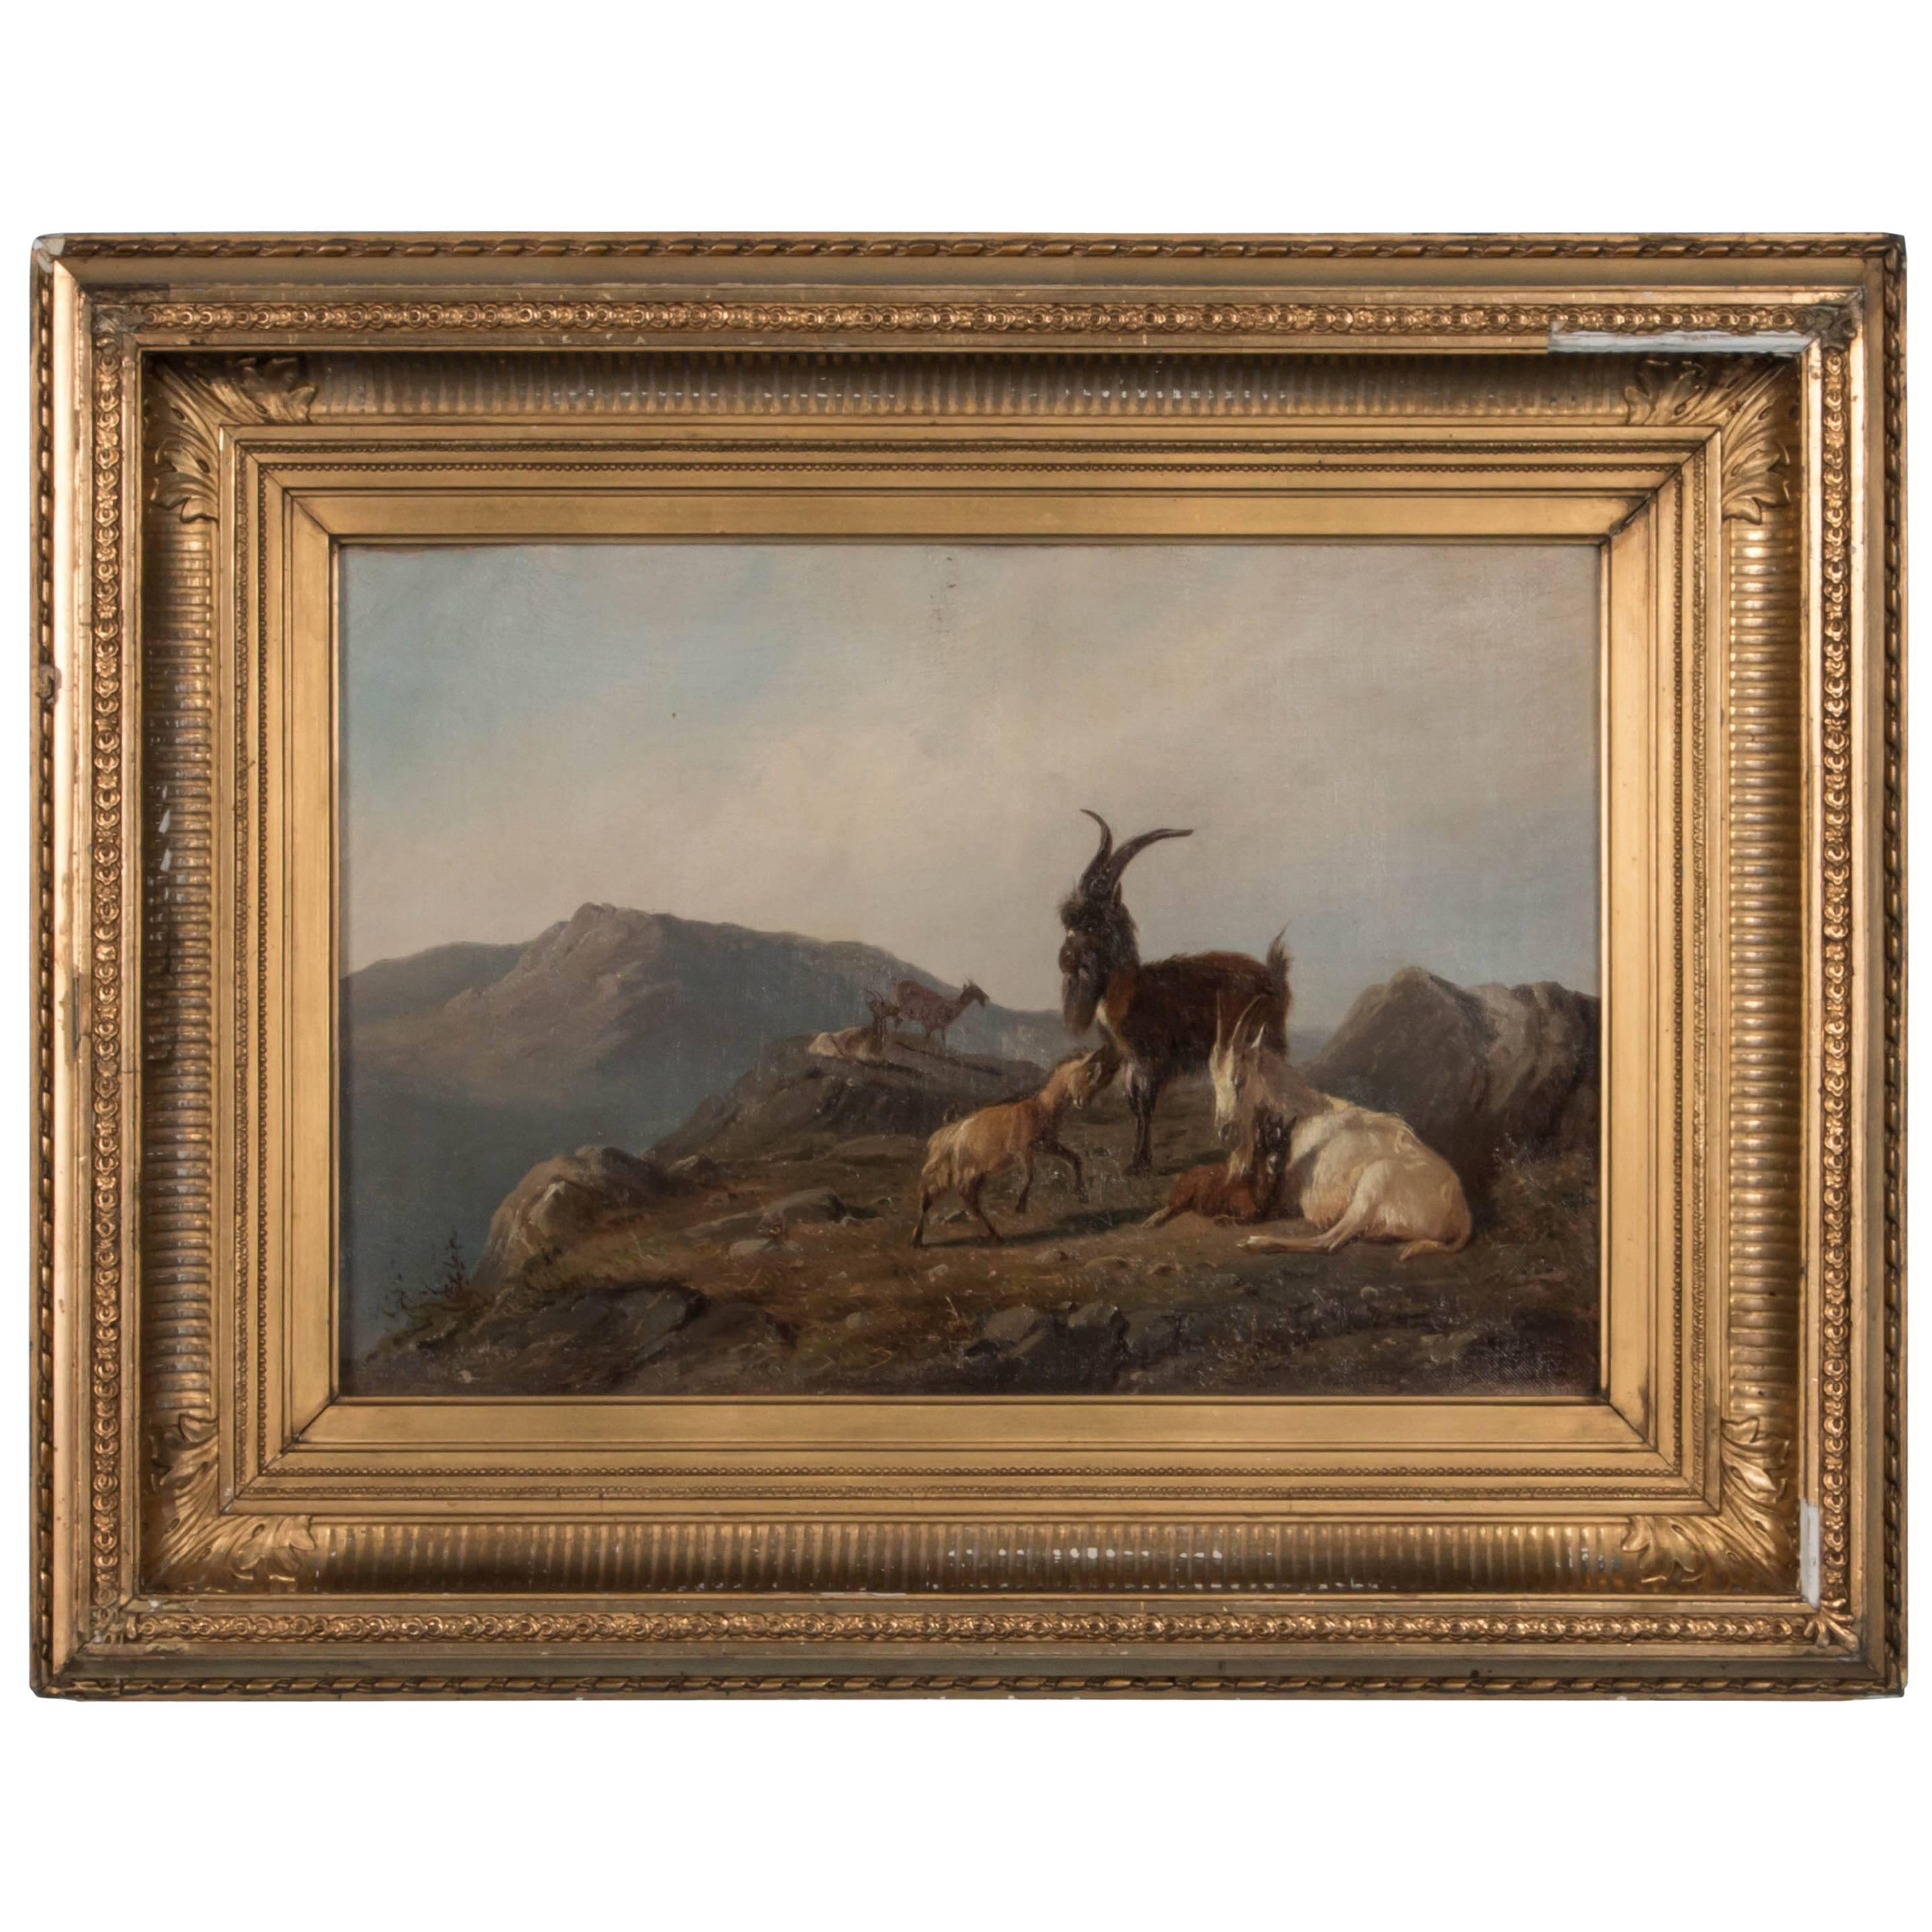 Antique 19th Century Oil Painting of Mountain Goats by Wilhelm Zillen